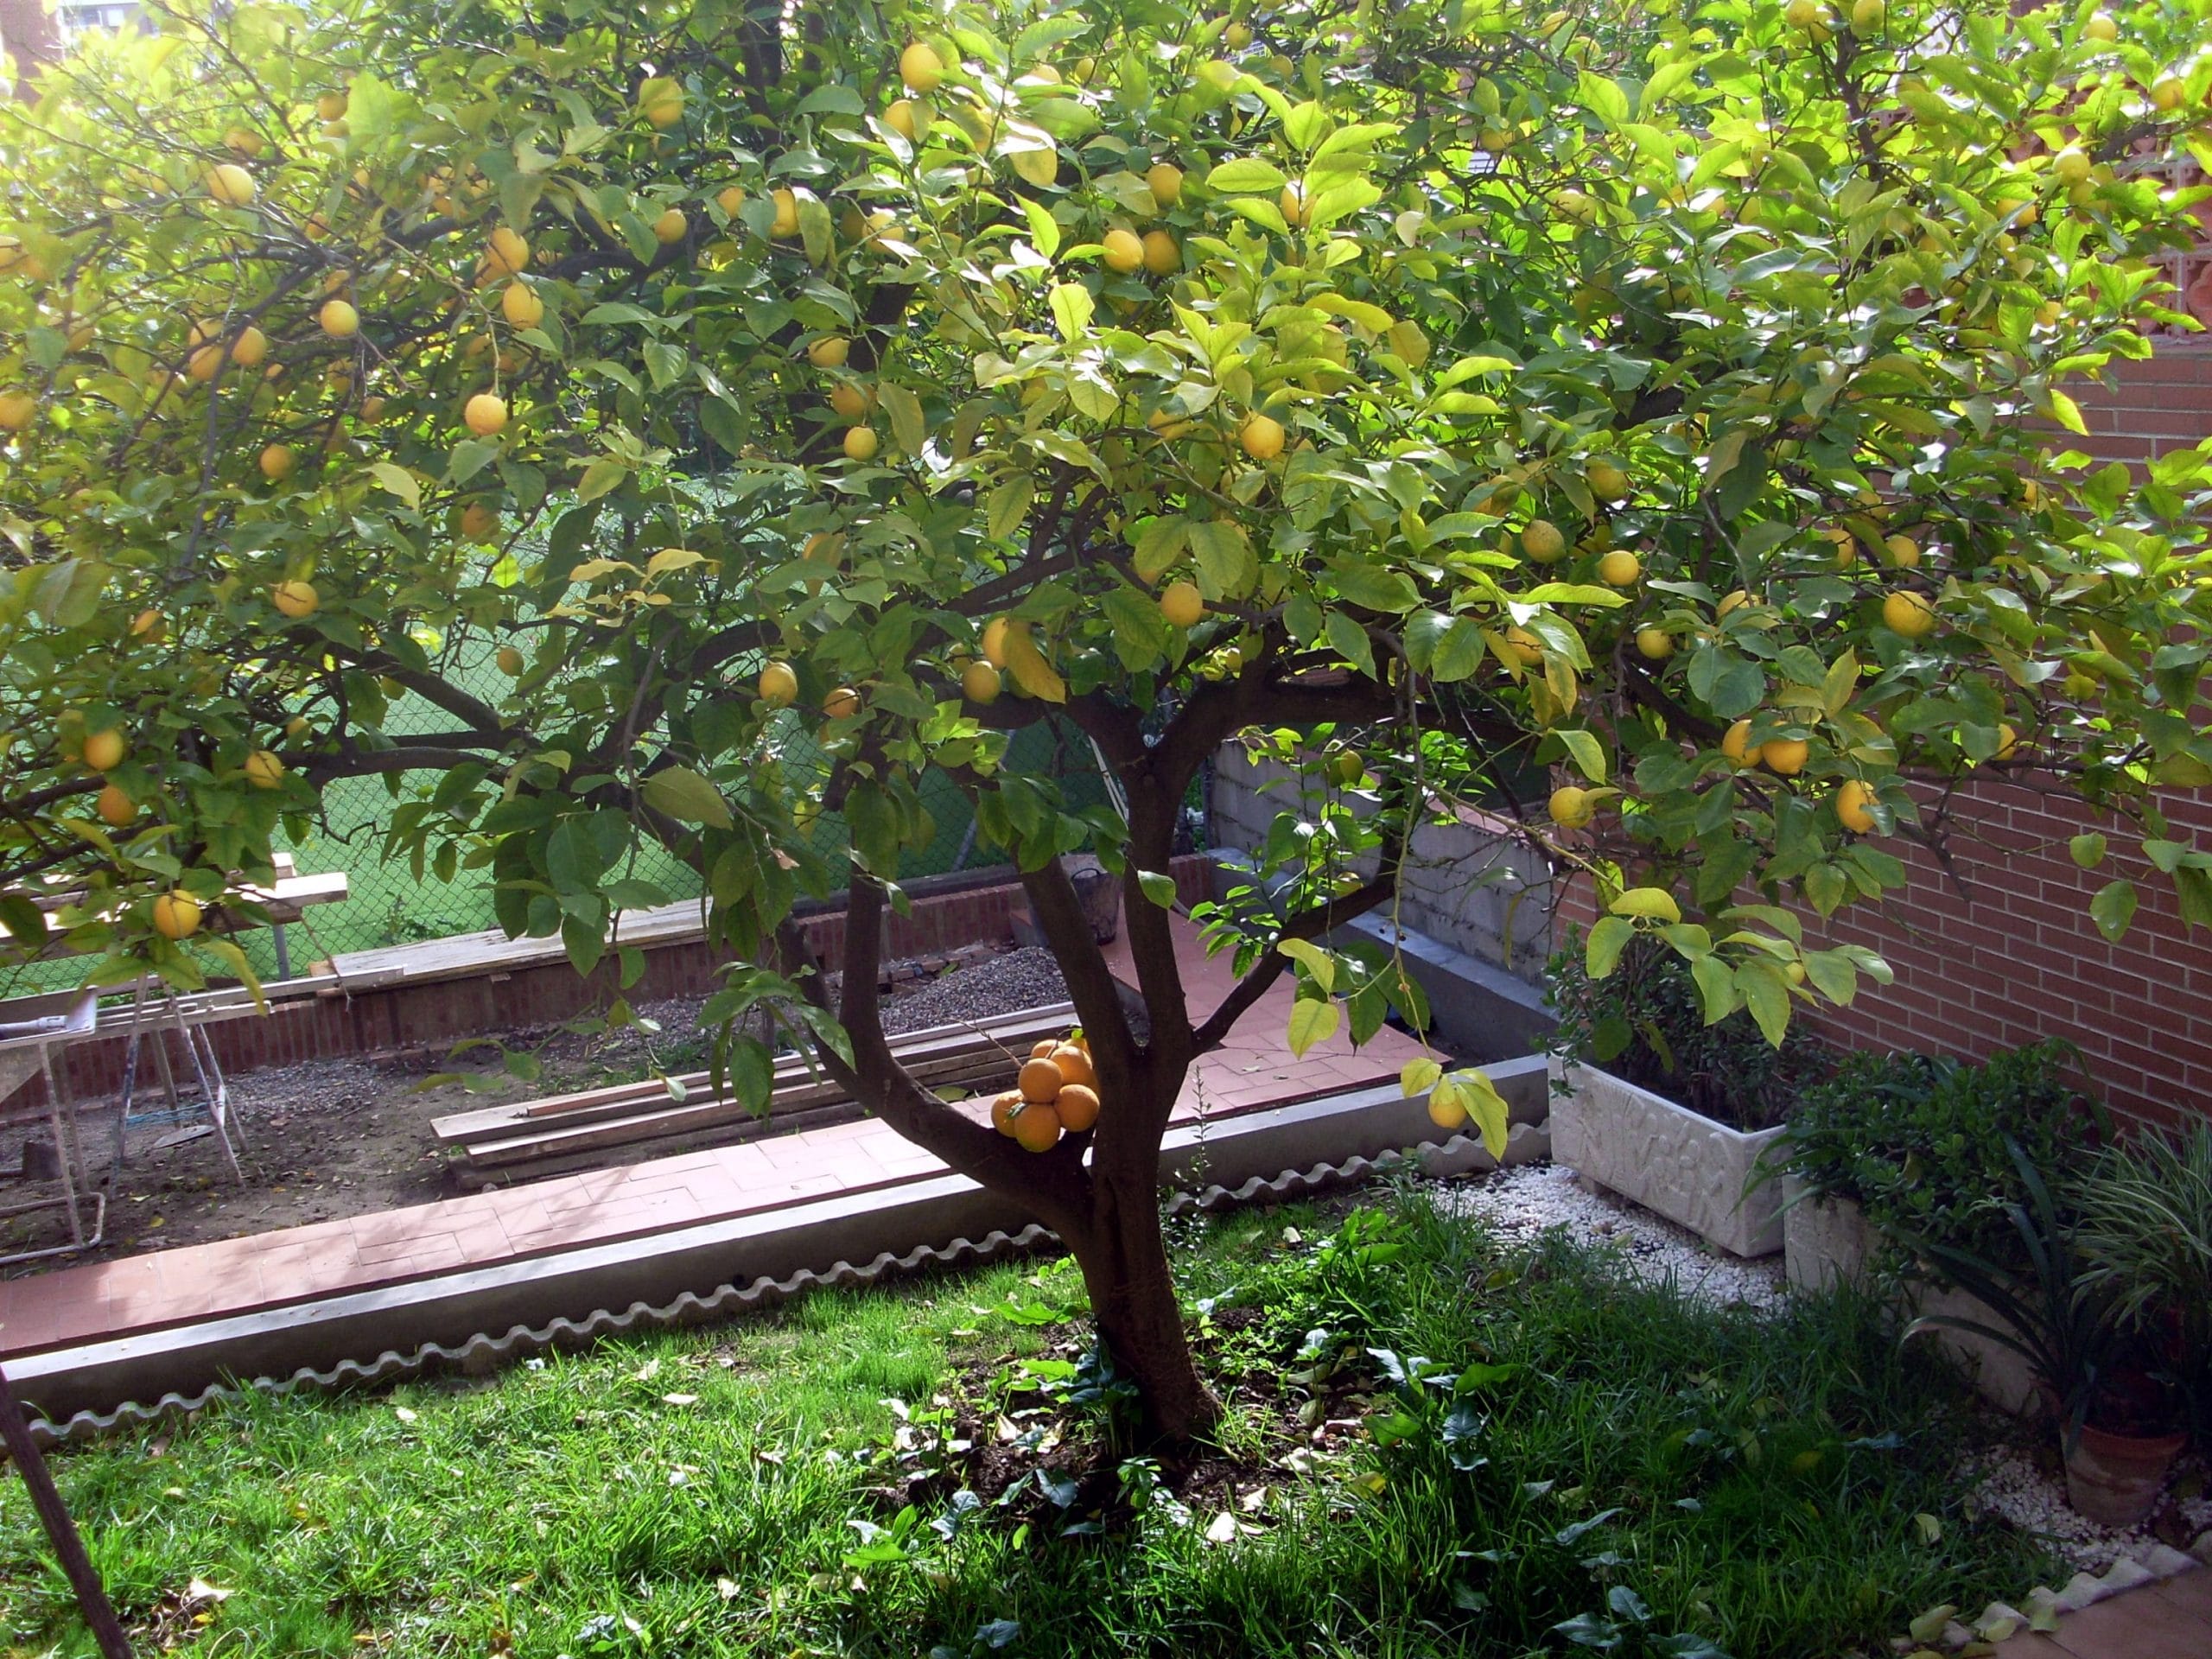 View of a lemon tree with grafted orange